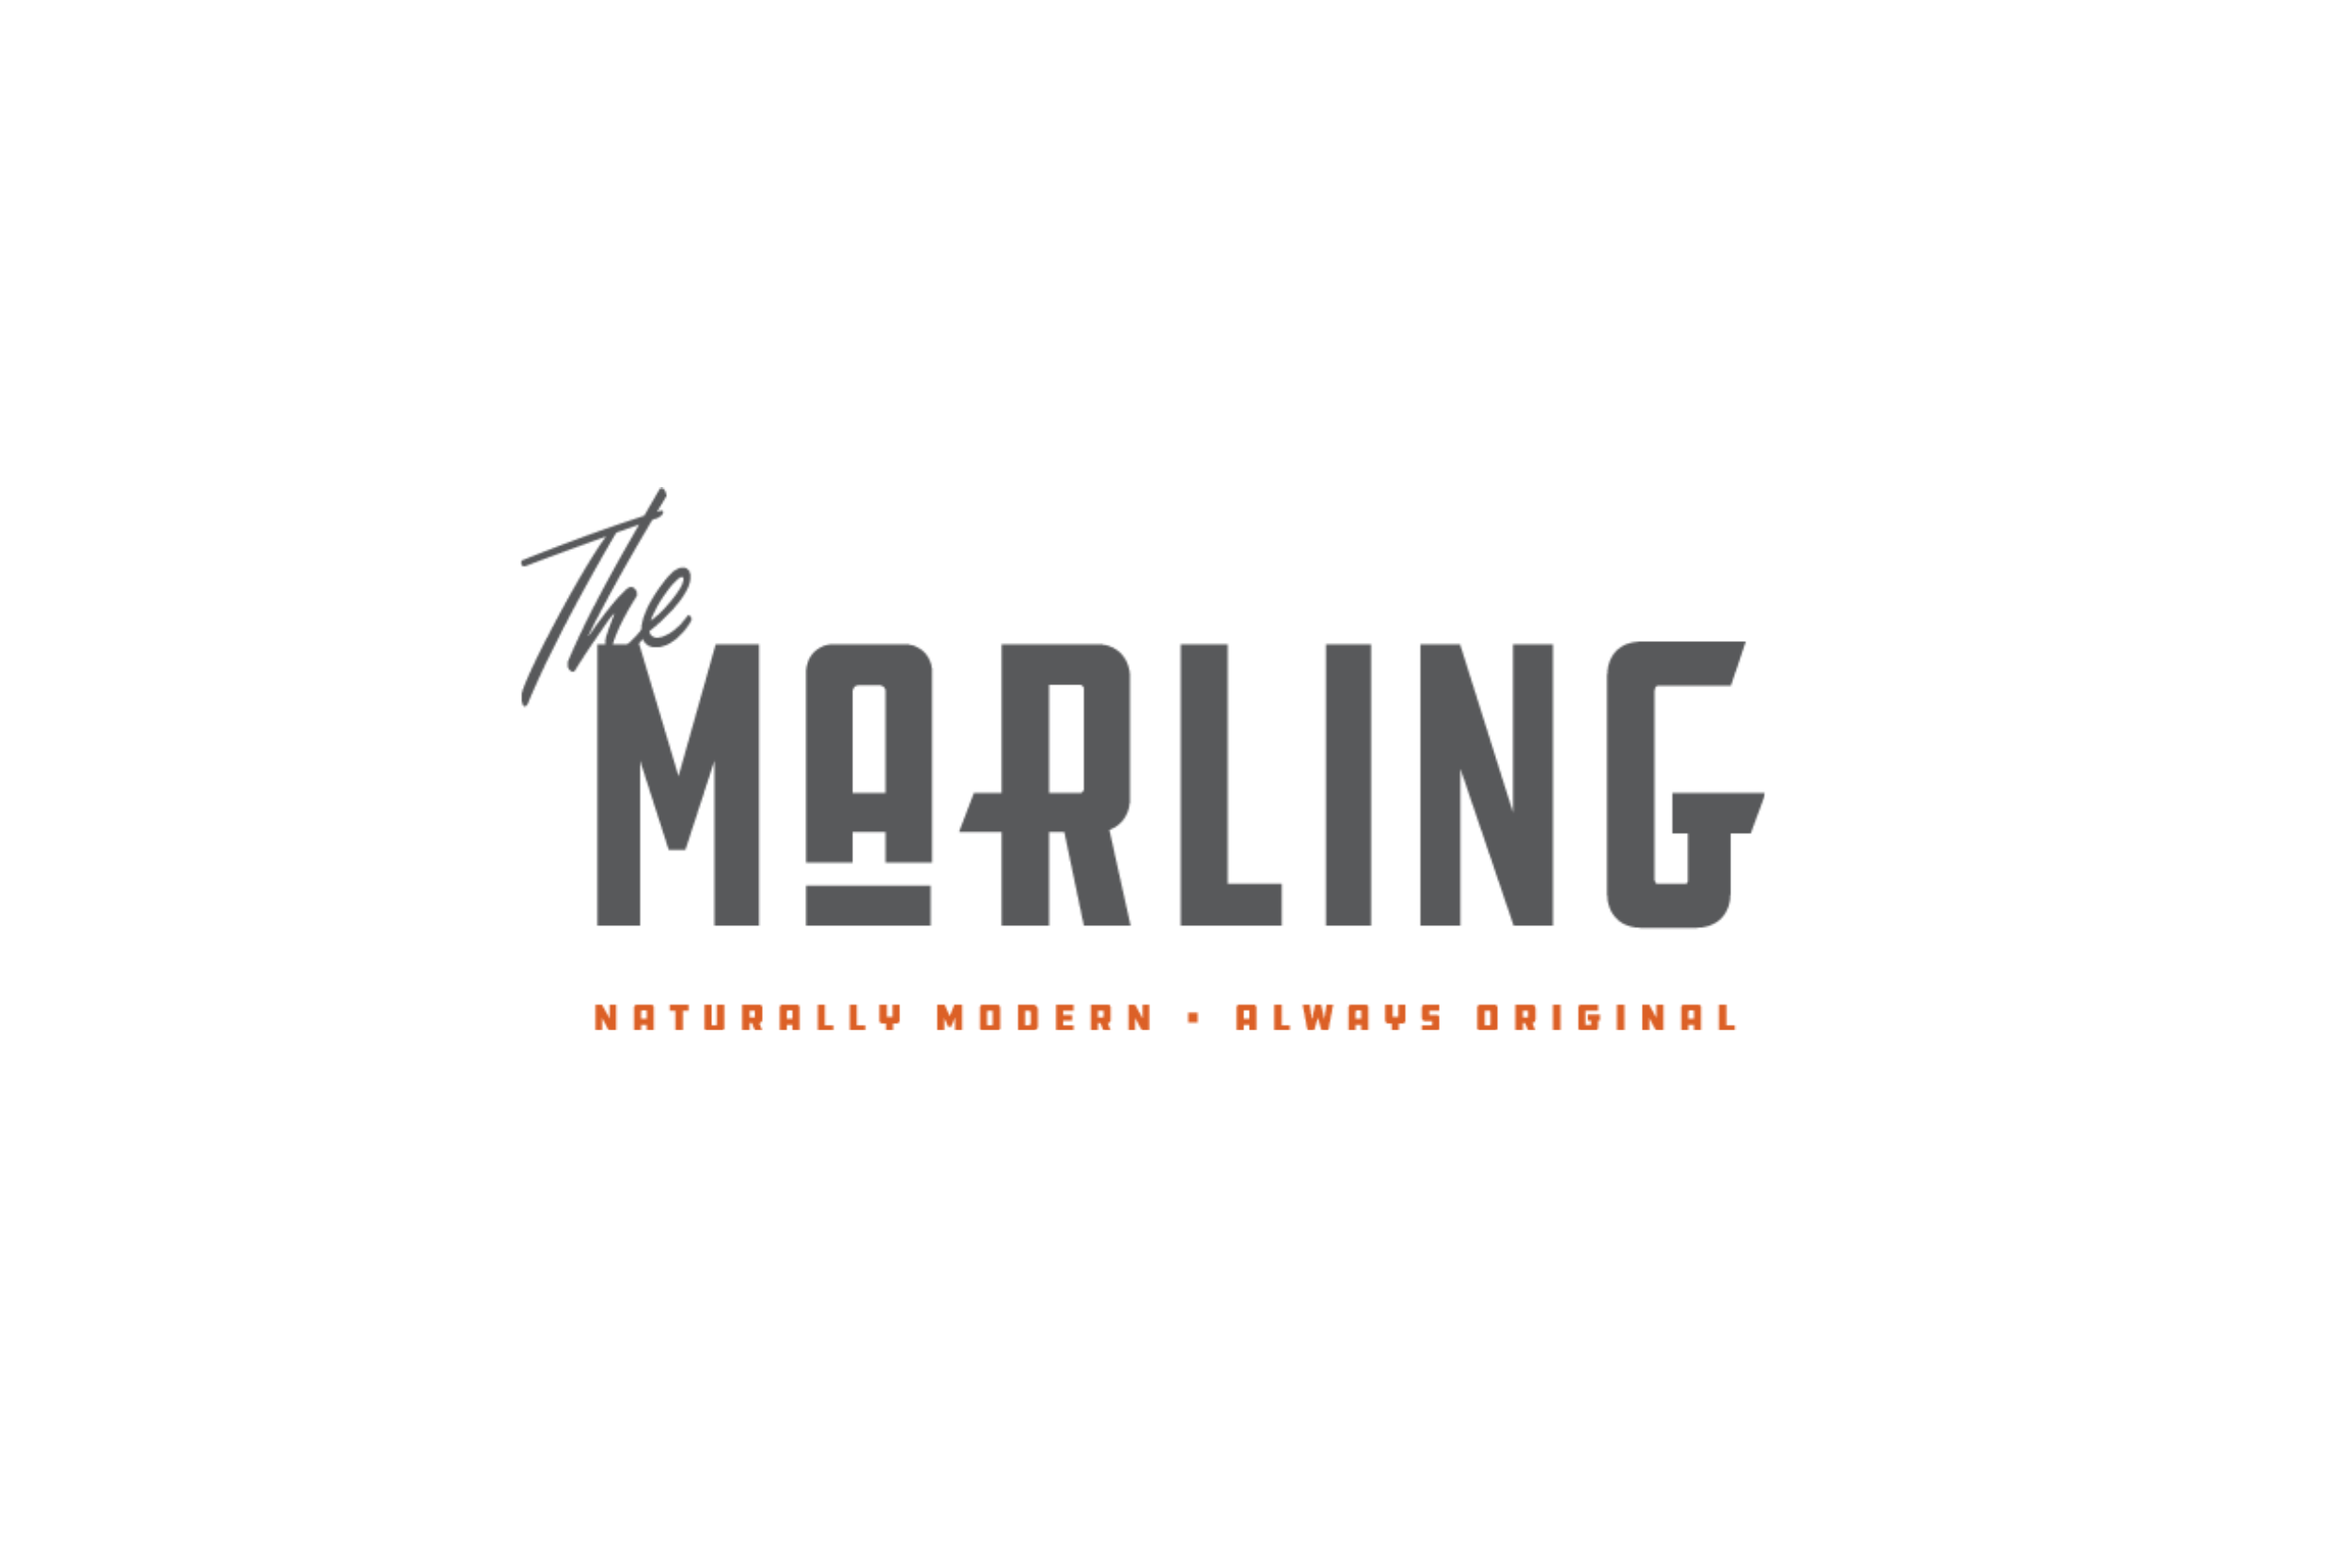 The Marling